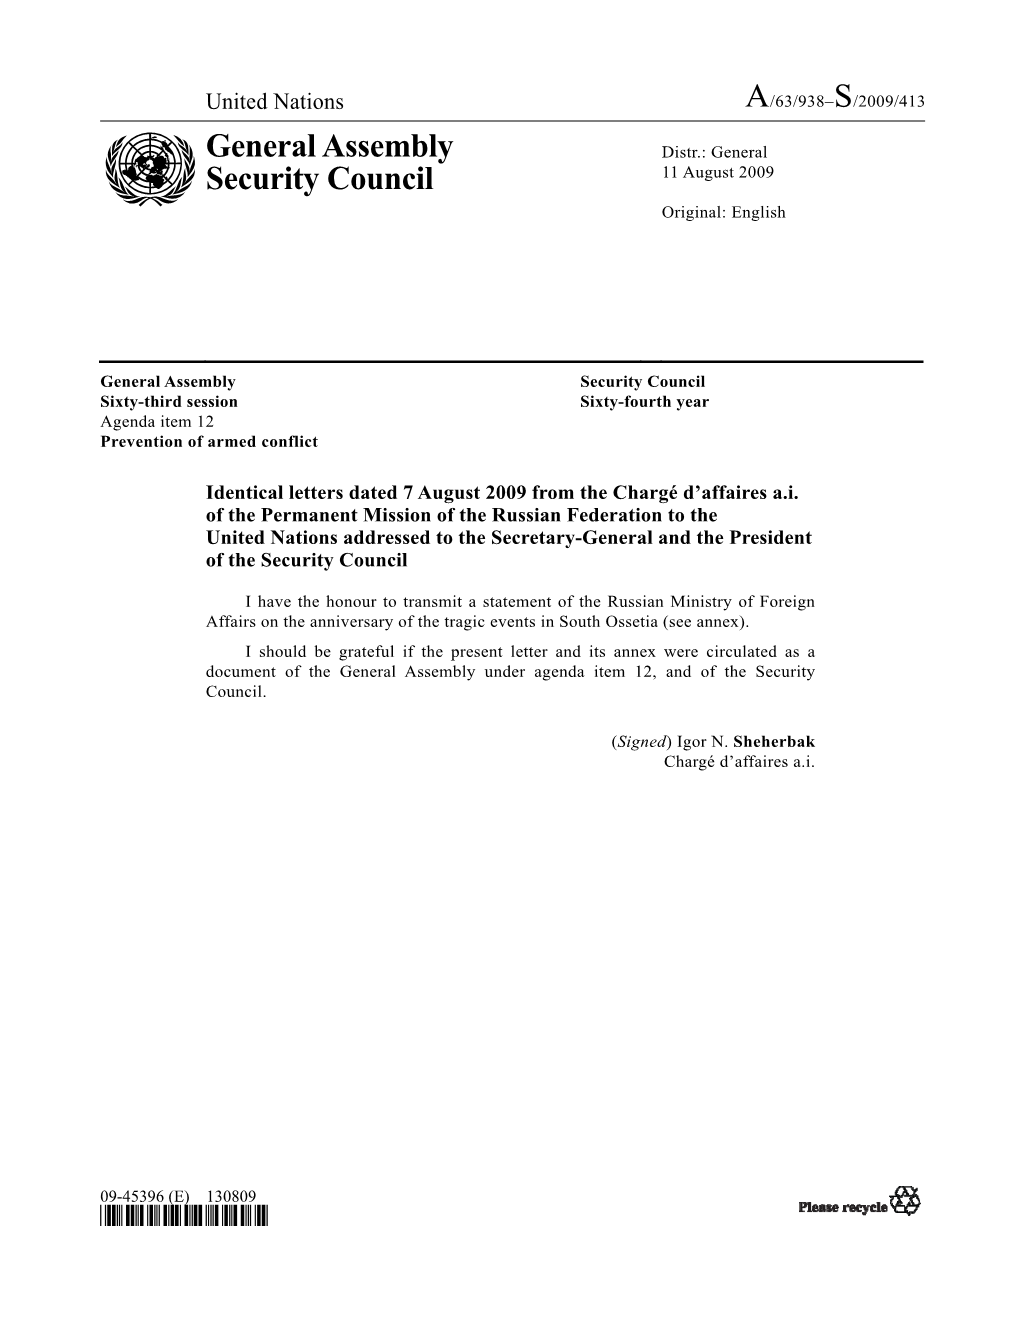 General Assembly Security Council Sixty-Third Session Sixty-Fourth Year Agenda Item 12 Prevention of Armed Conflict